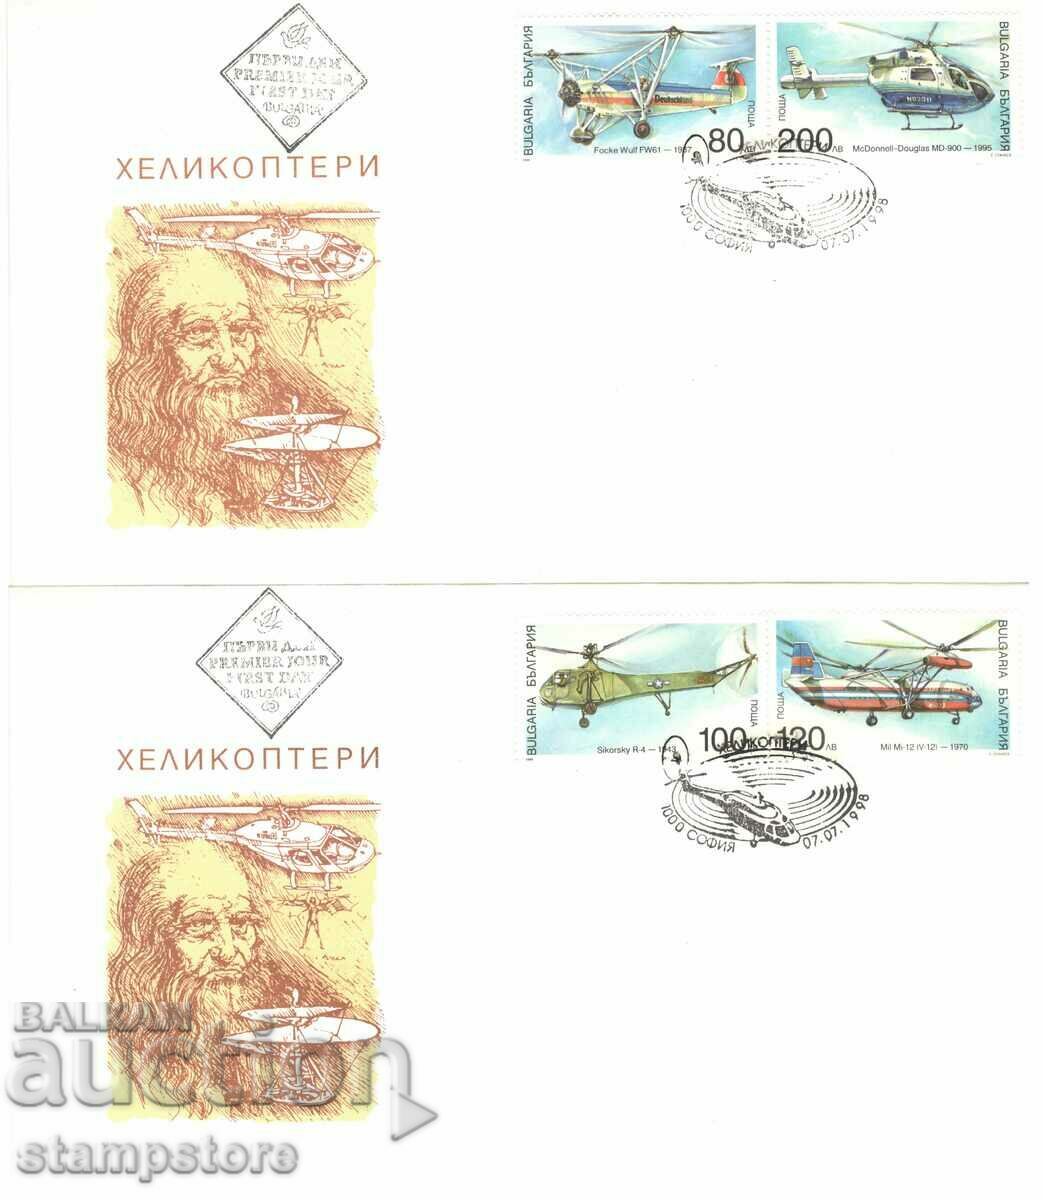 Bulgaria FDC Helicopters